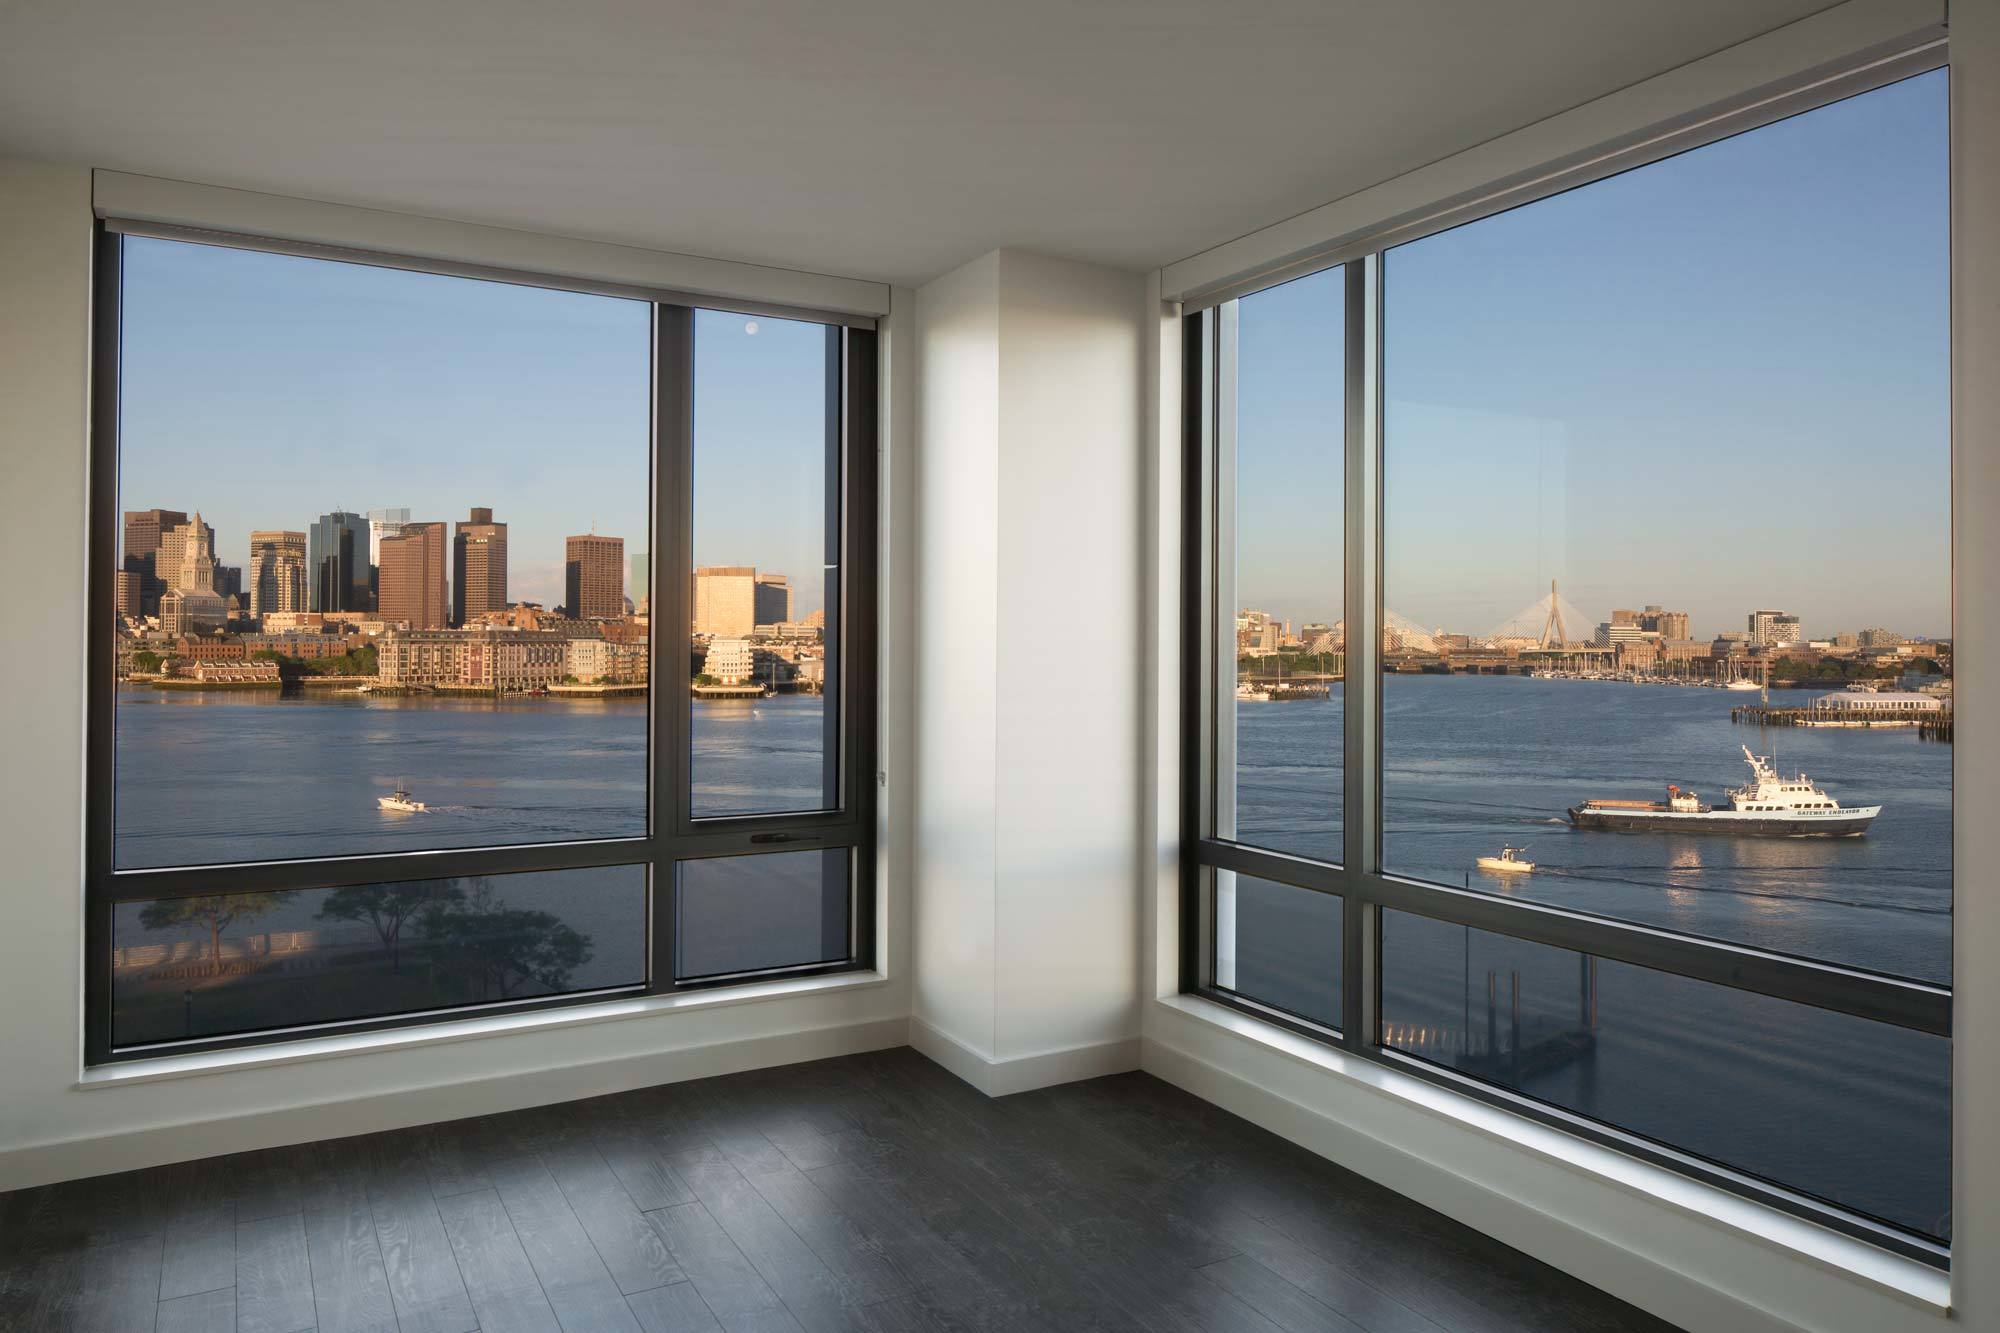 Eddy East Boston model unit with views of water